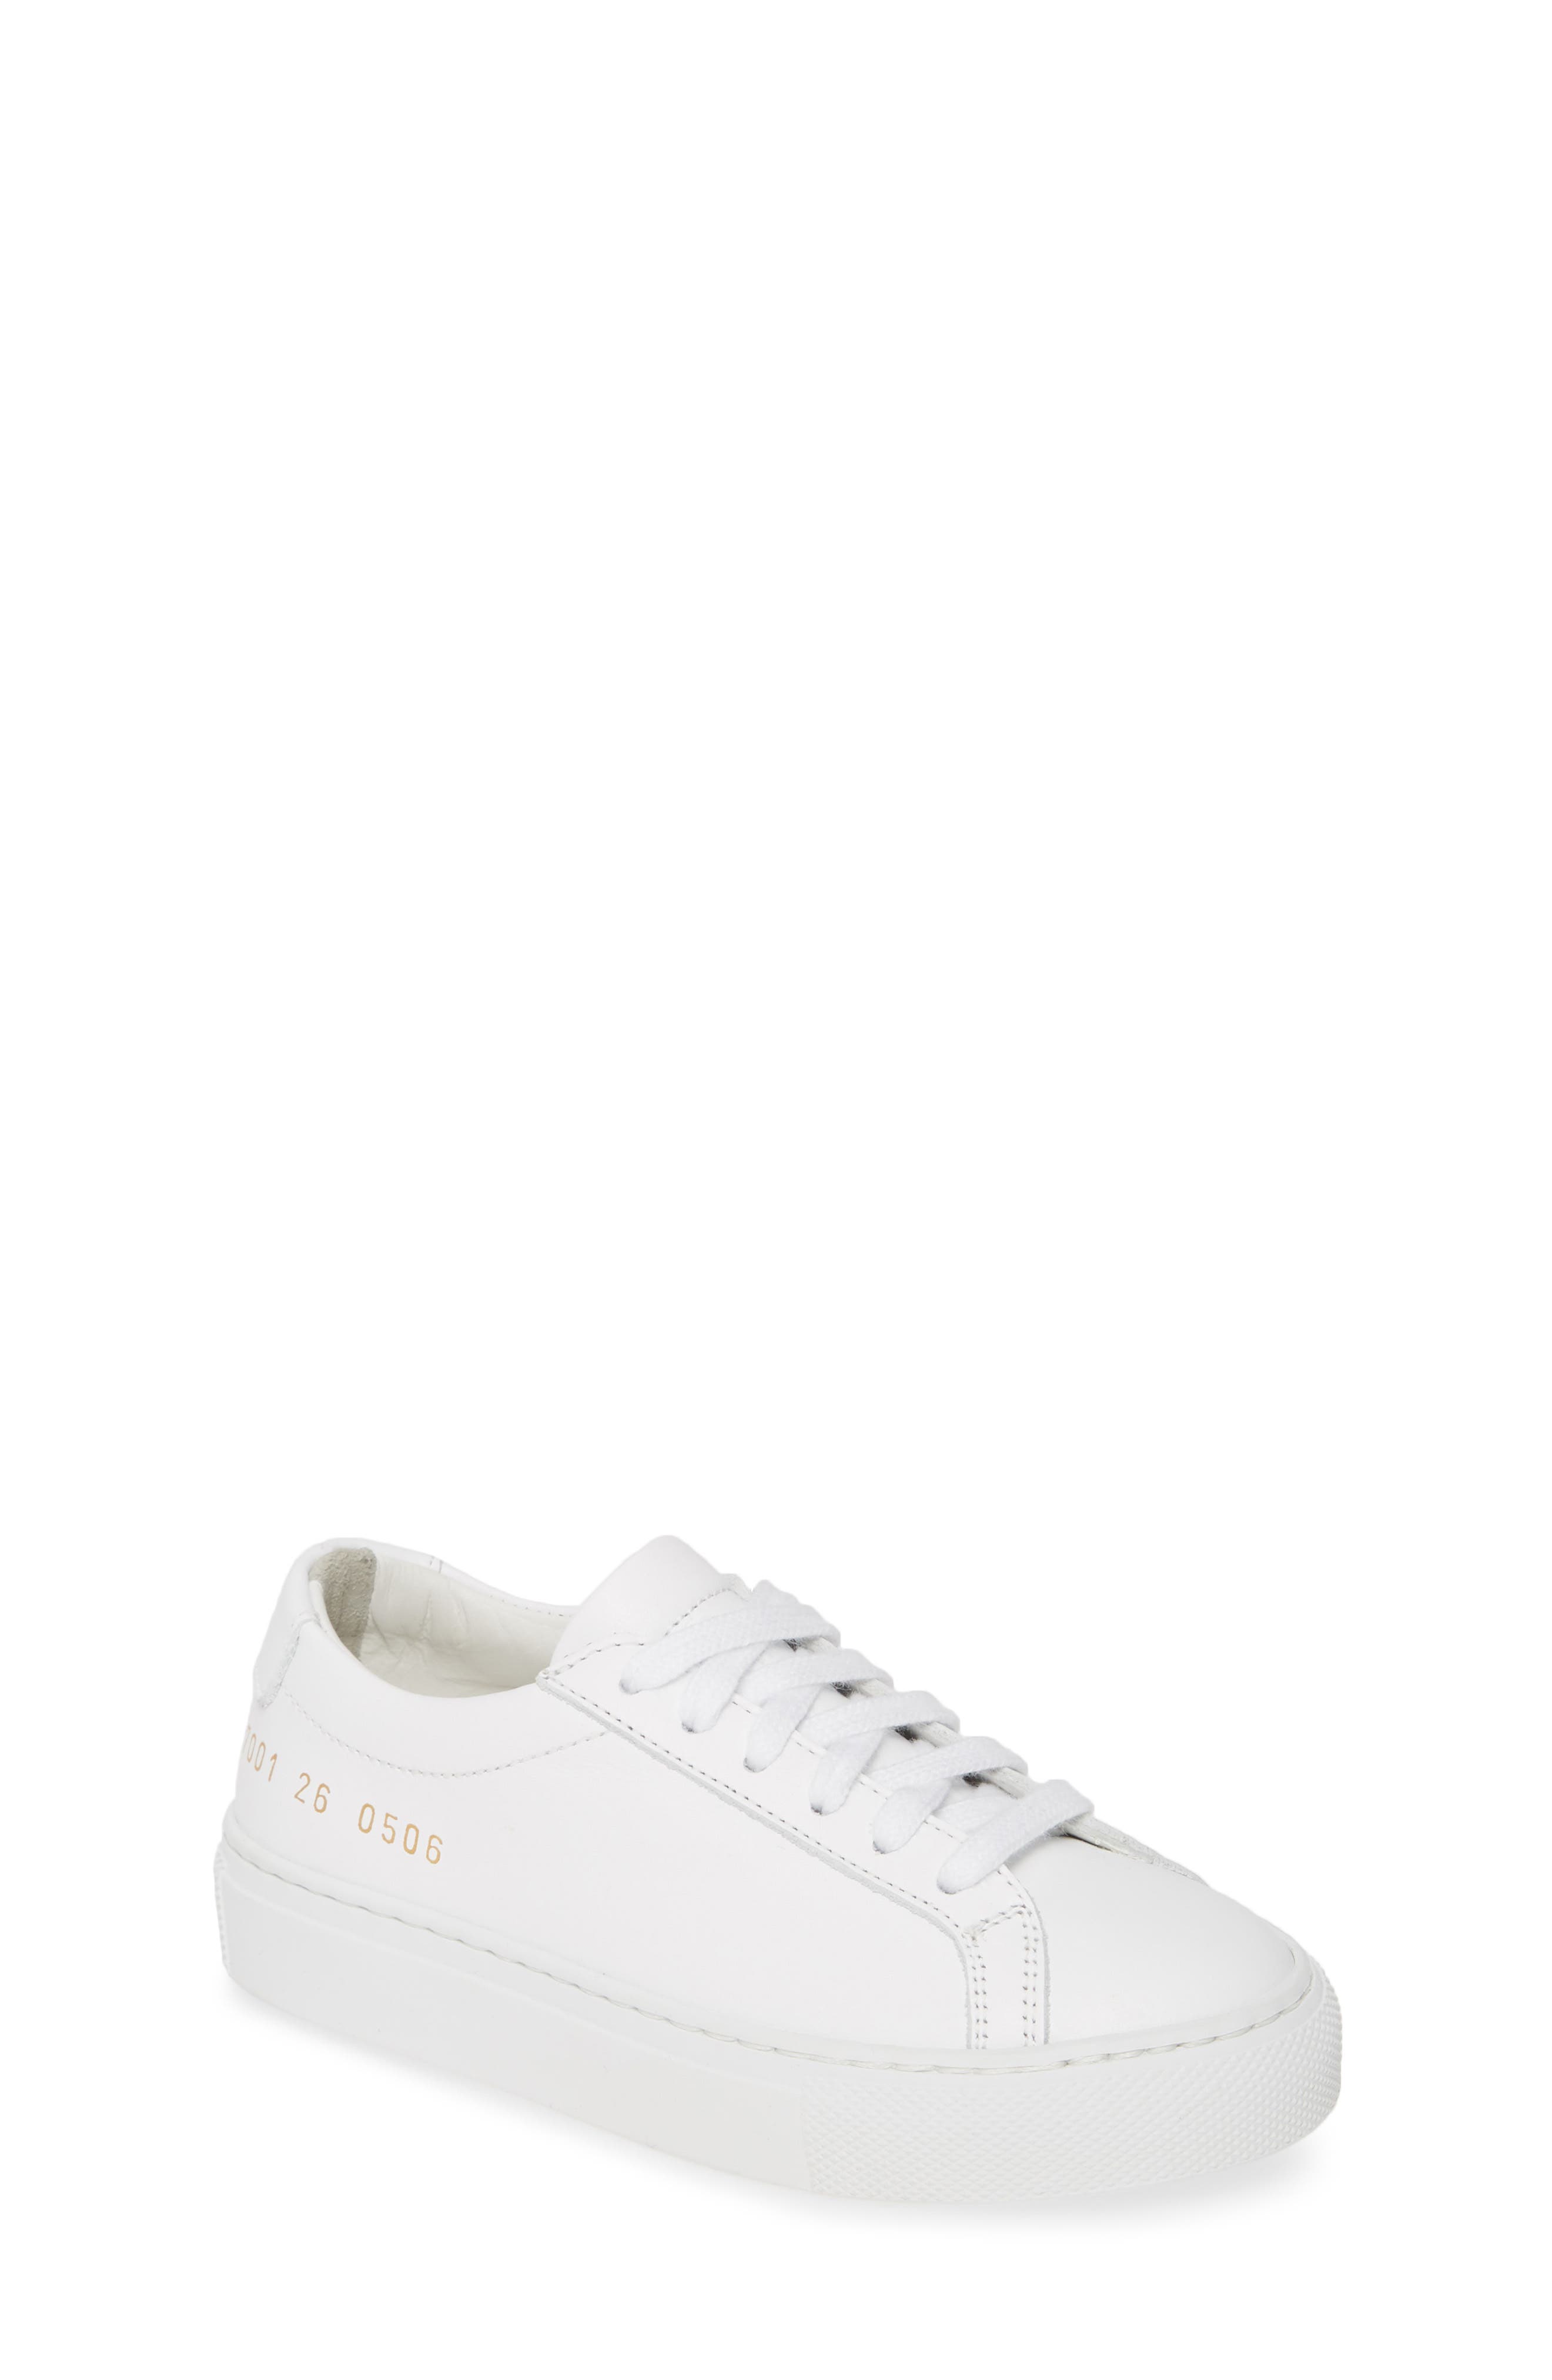 Common Projects All New Markdowns 